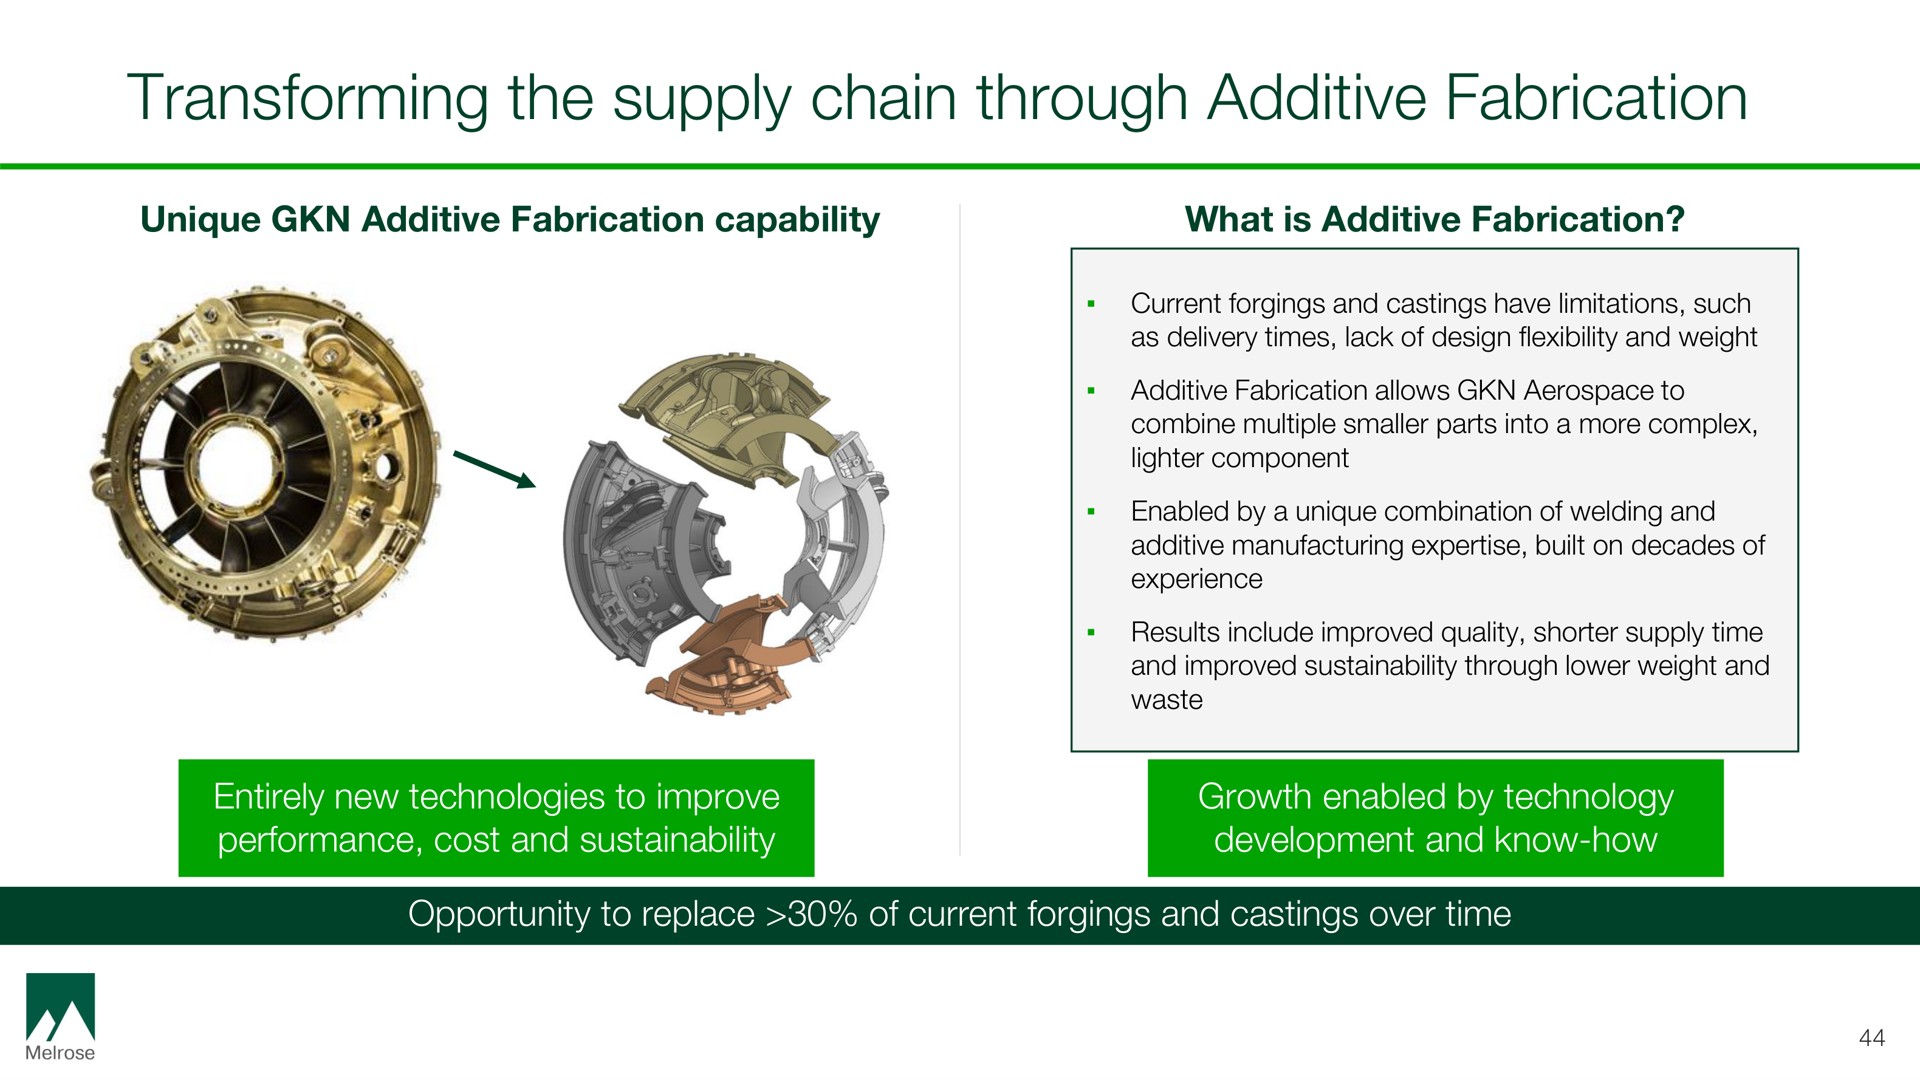 transforming the supply chain through additive fabrication | Melrose